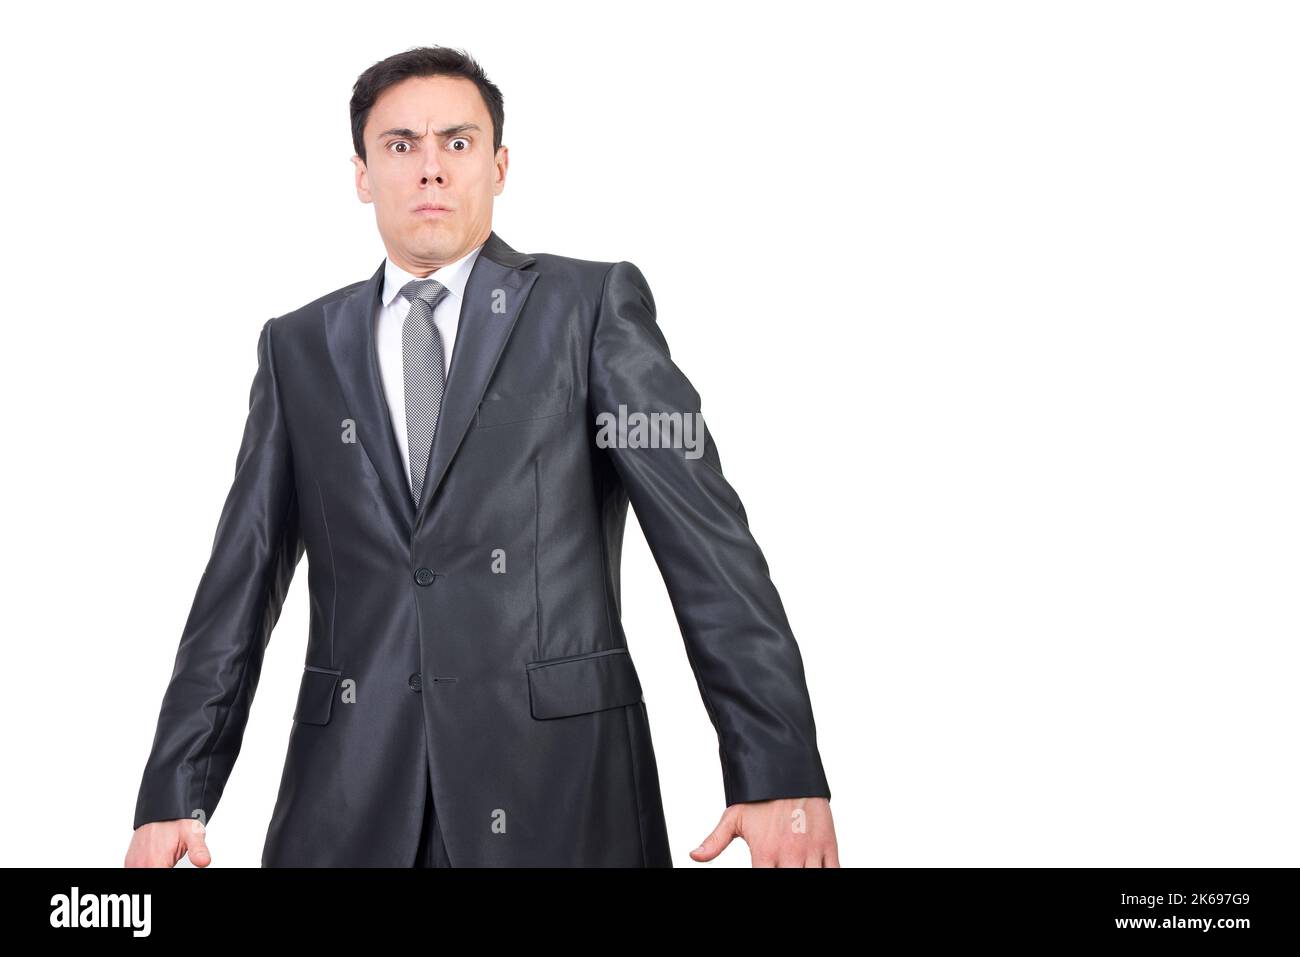 Surprised man in suit looking at camera Stock Photo